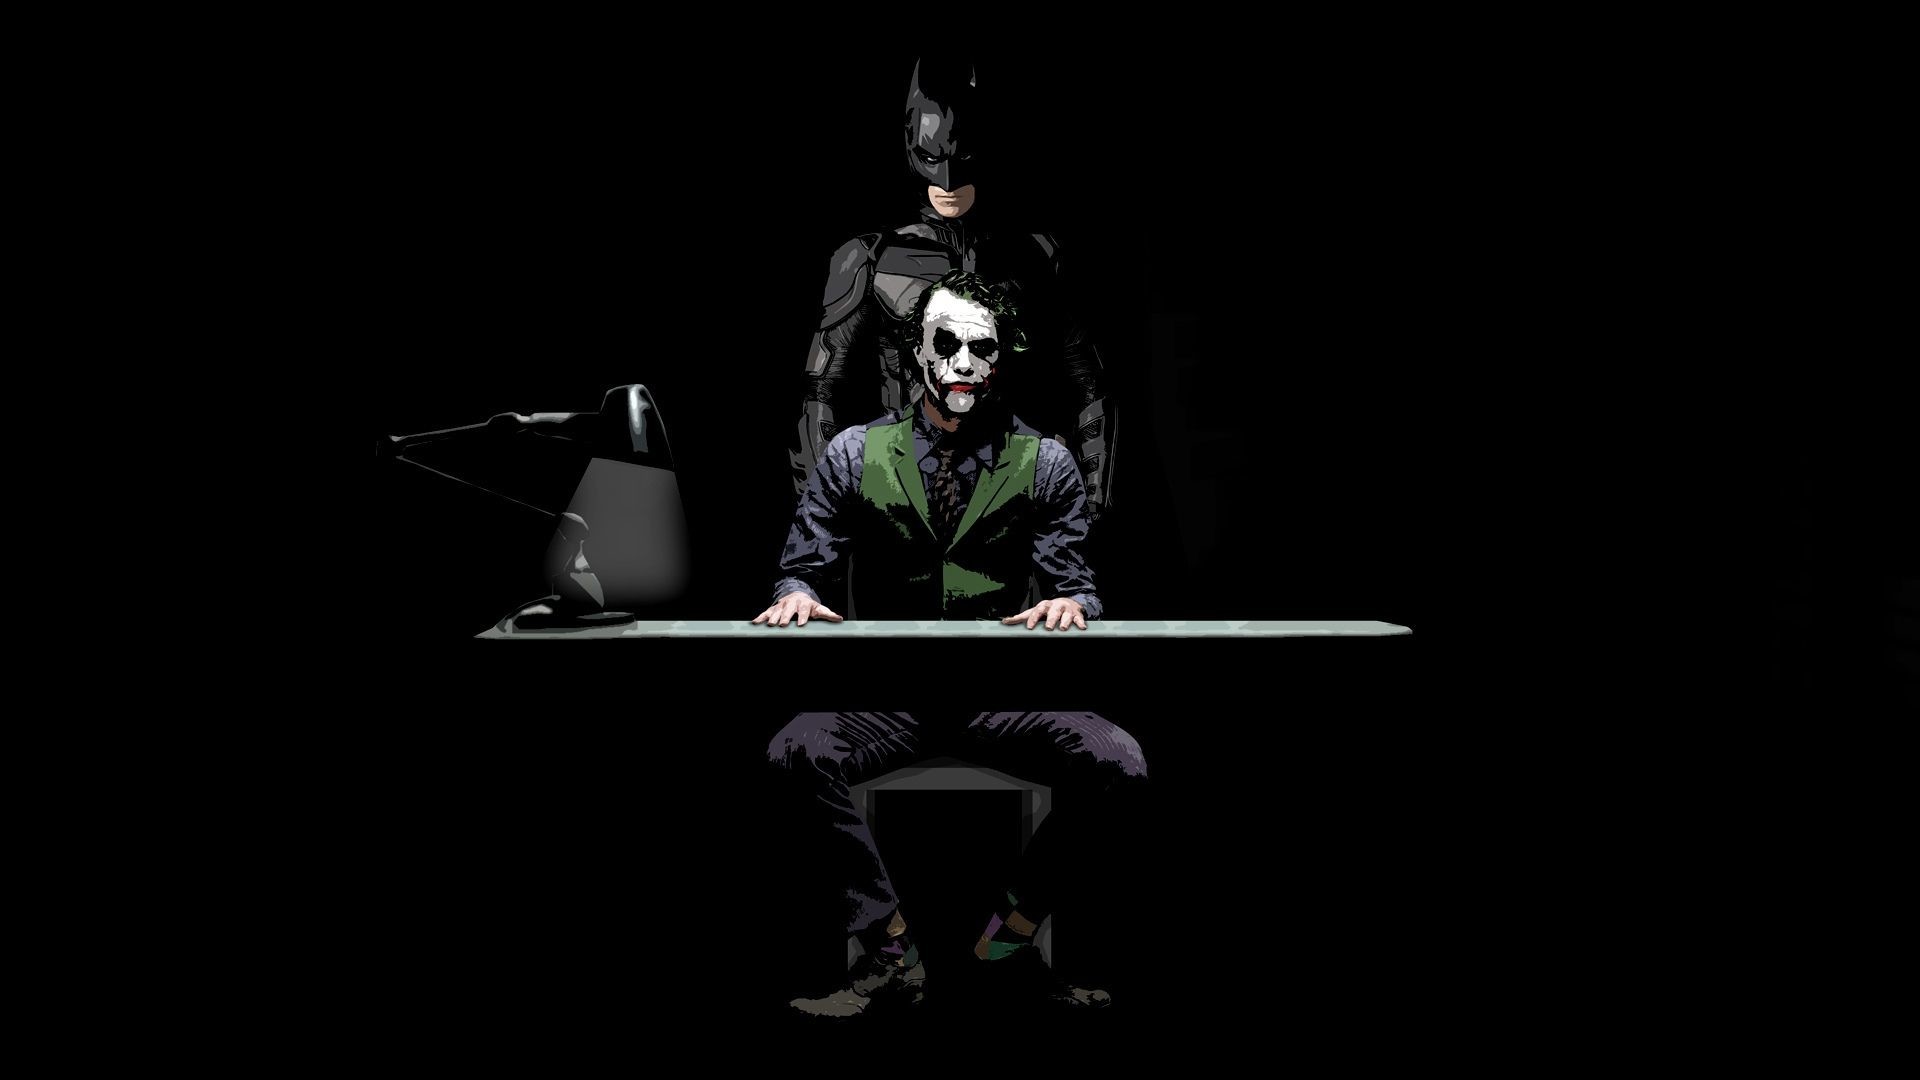 1920x1080 Movies: Batman And Joker Sketch, picture nr. 62132